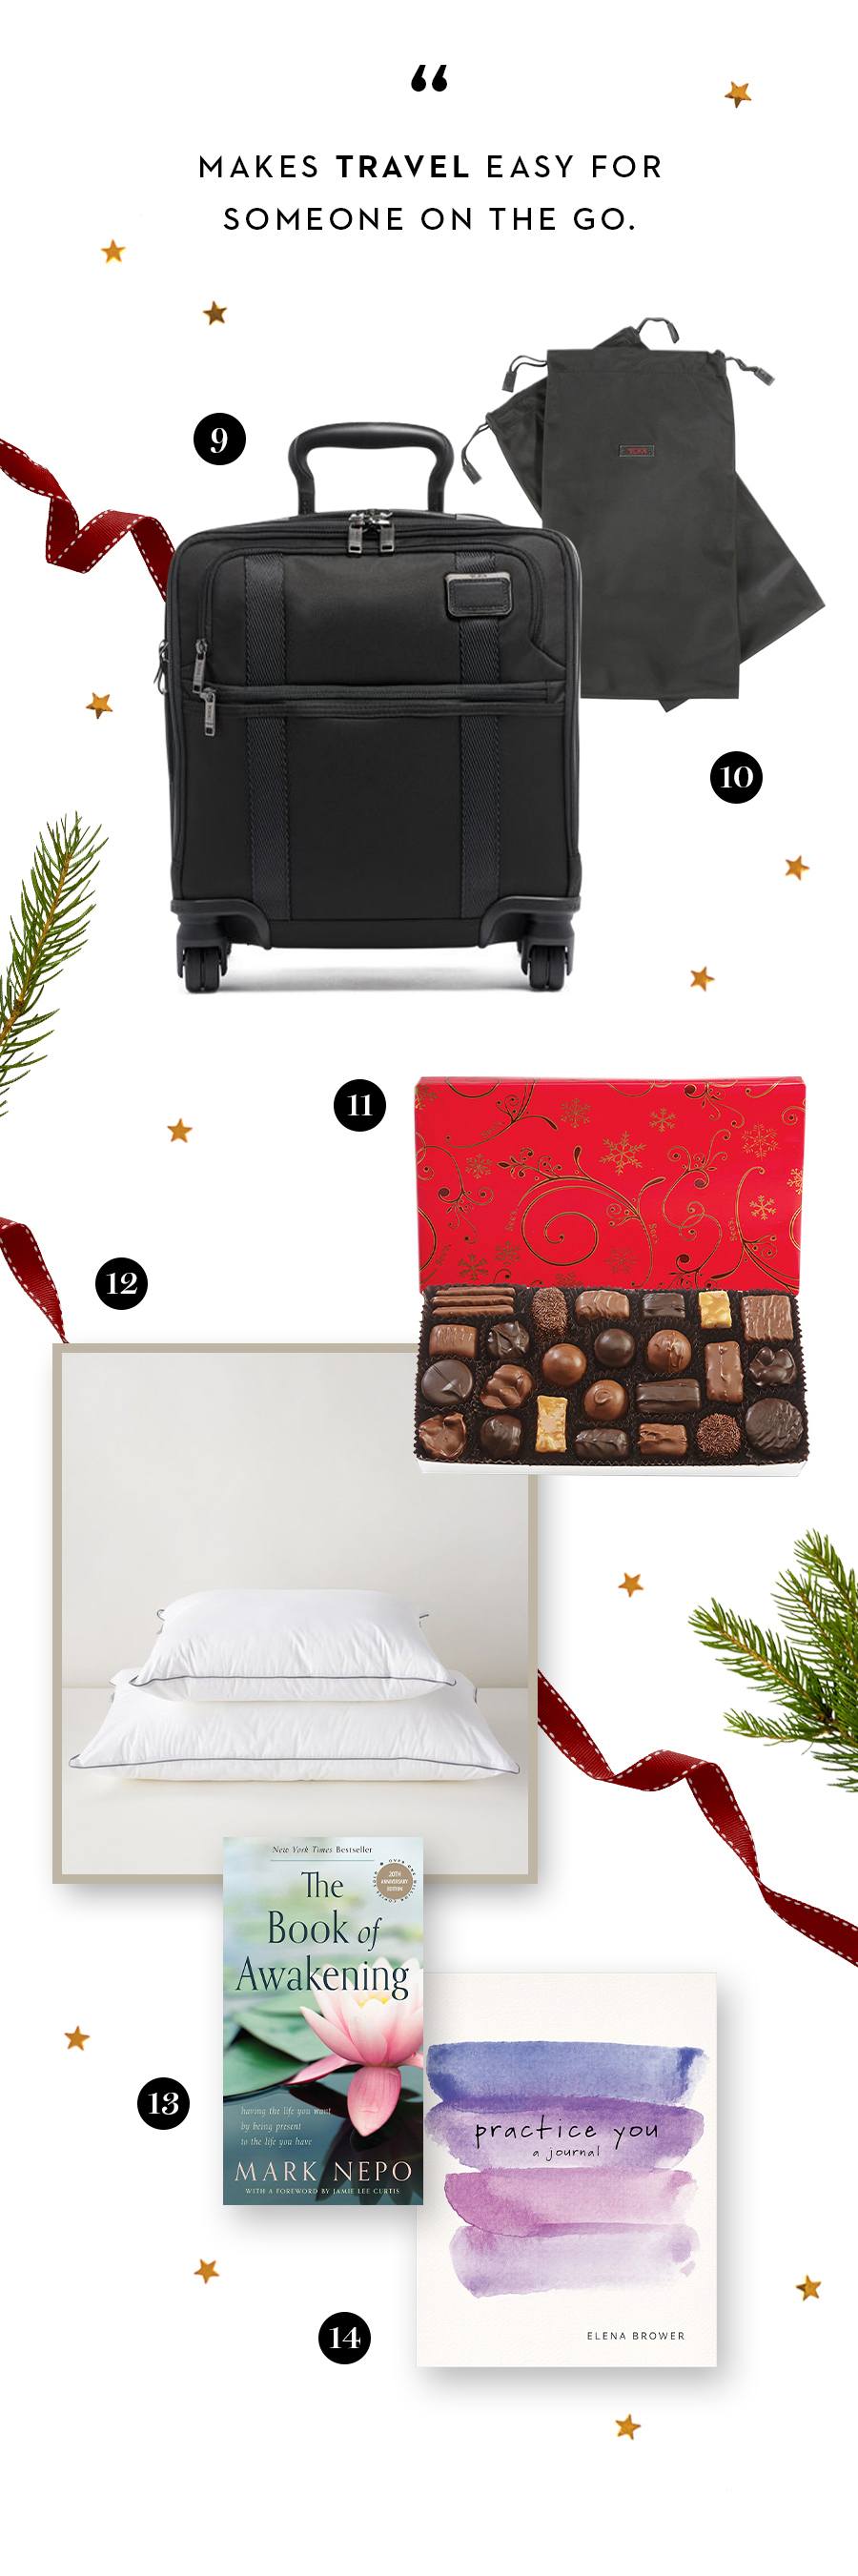 luggage pillow and chocolate